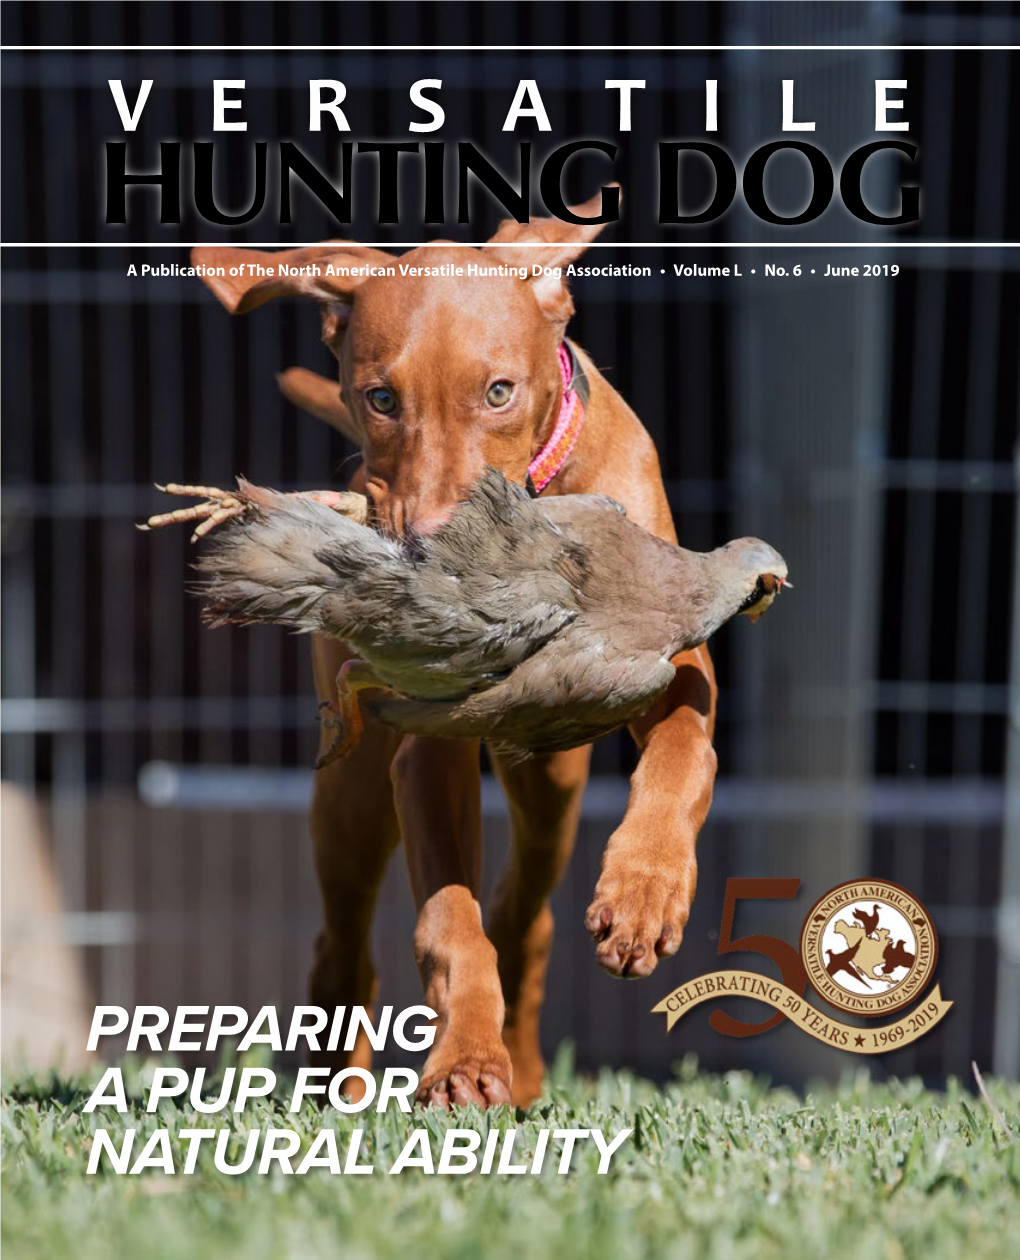 VERSATILE HUNTING DOG a Publication of the North American Versatile Hunting Dog Association • Volume L • No